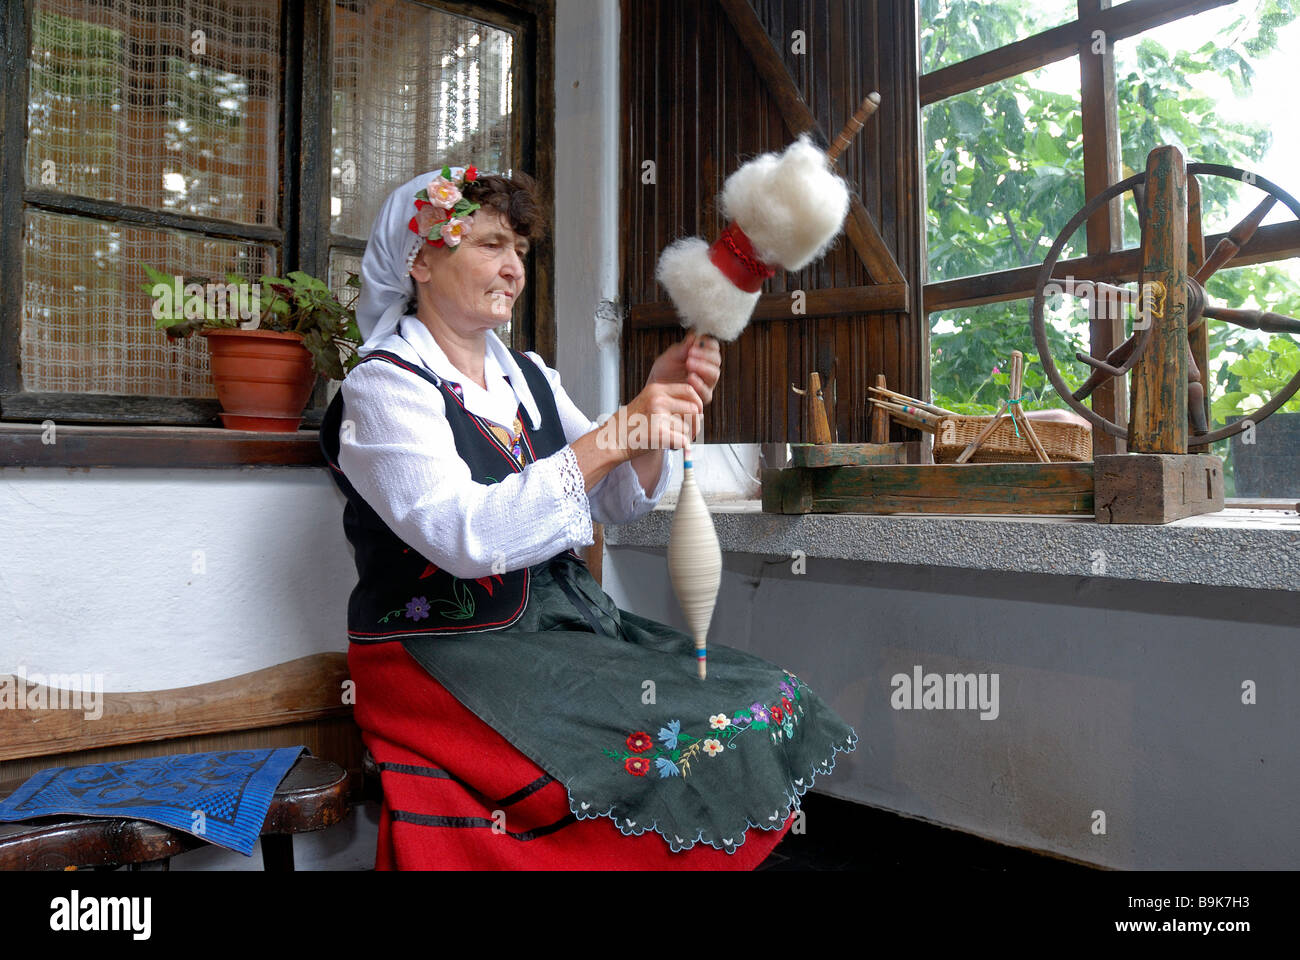 Bulgaria, Black Sea region, Bata, cotton spinner in traditional outfit Stock Photo